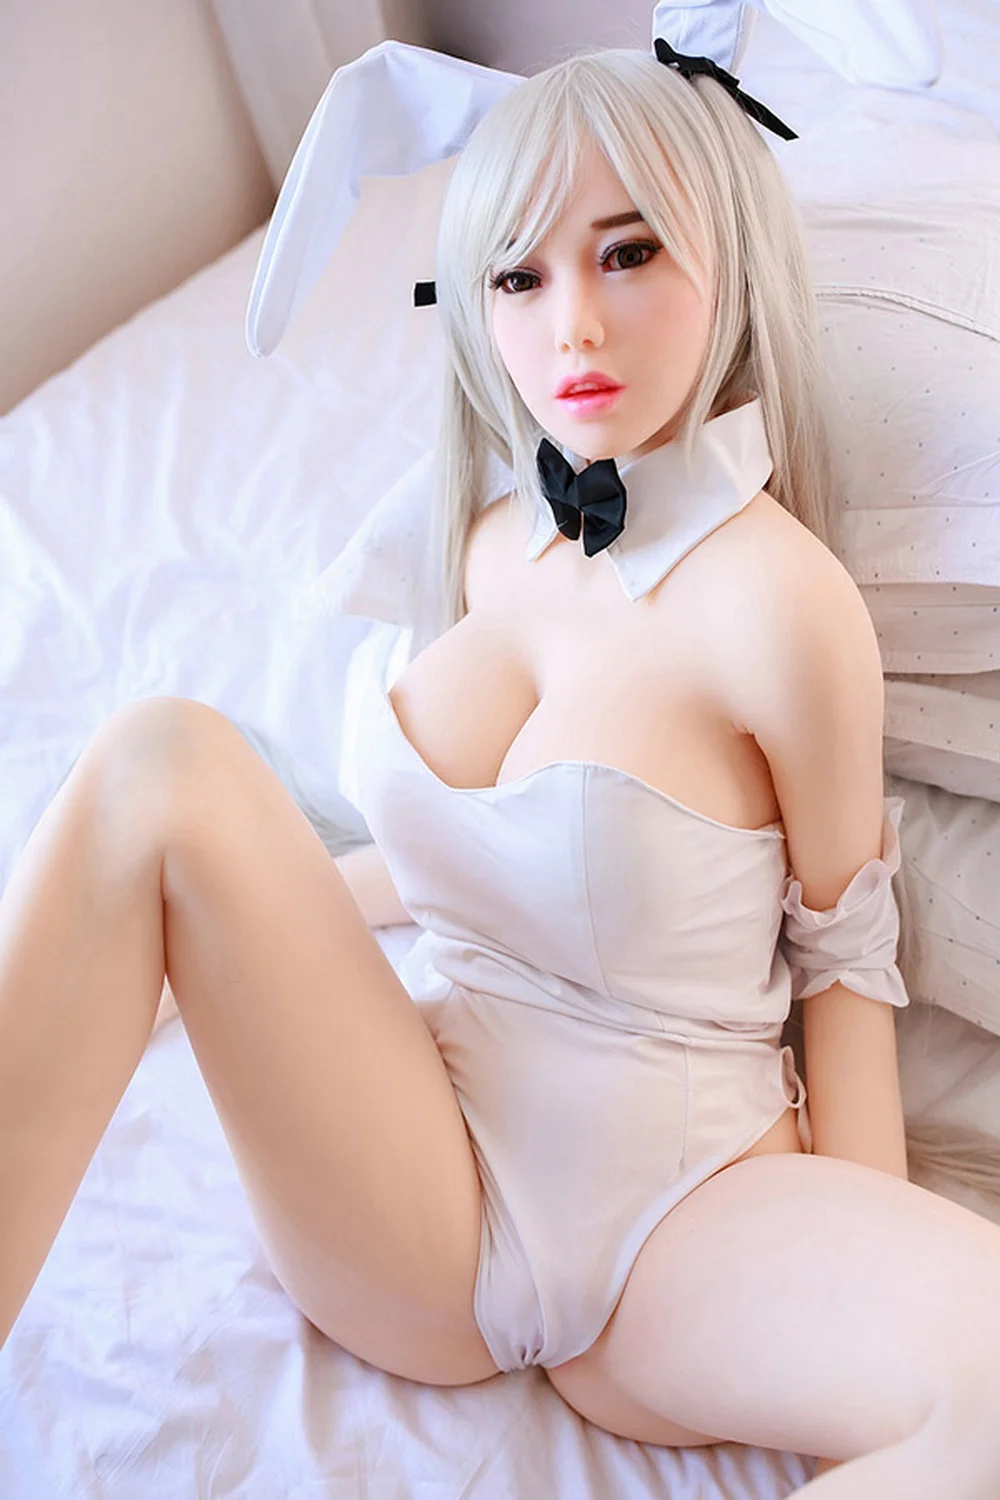 Anime sex doll lying on the bed with spread legs